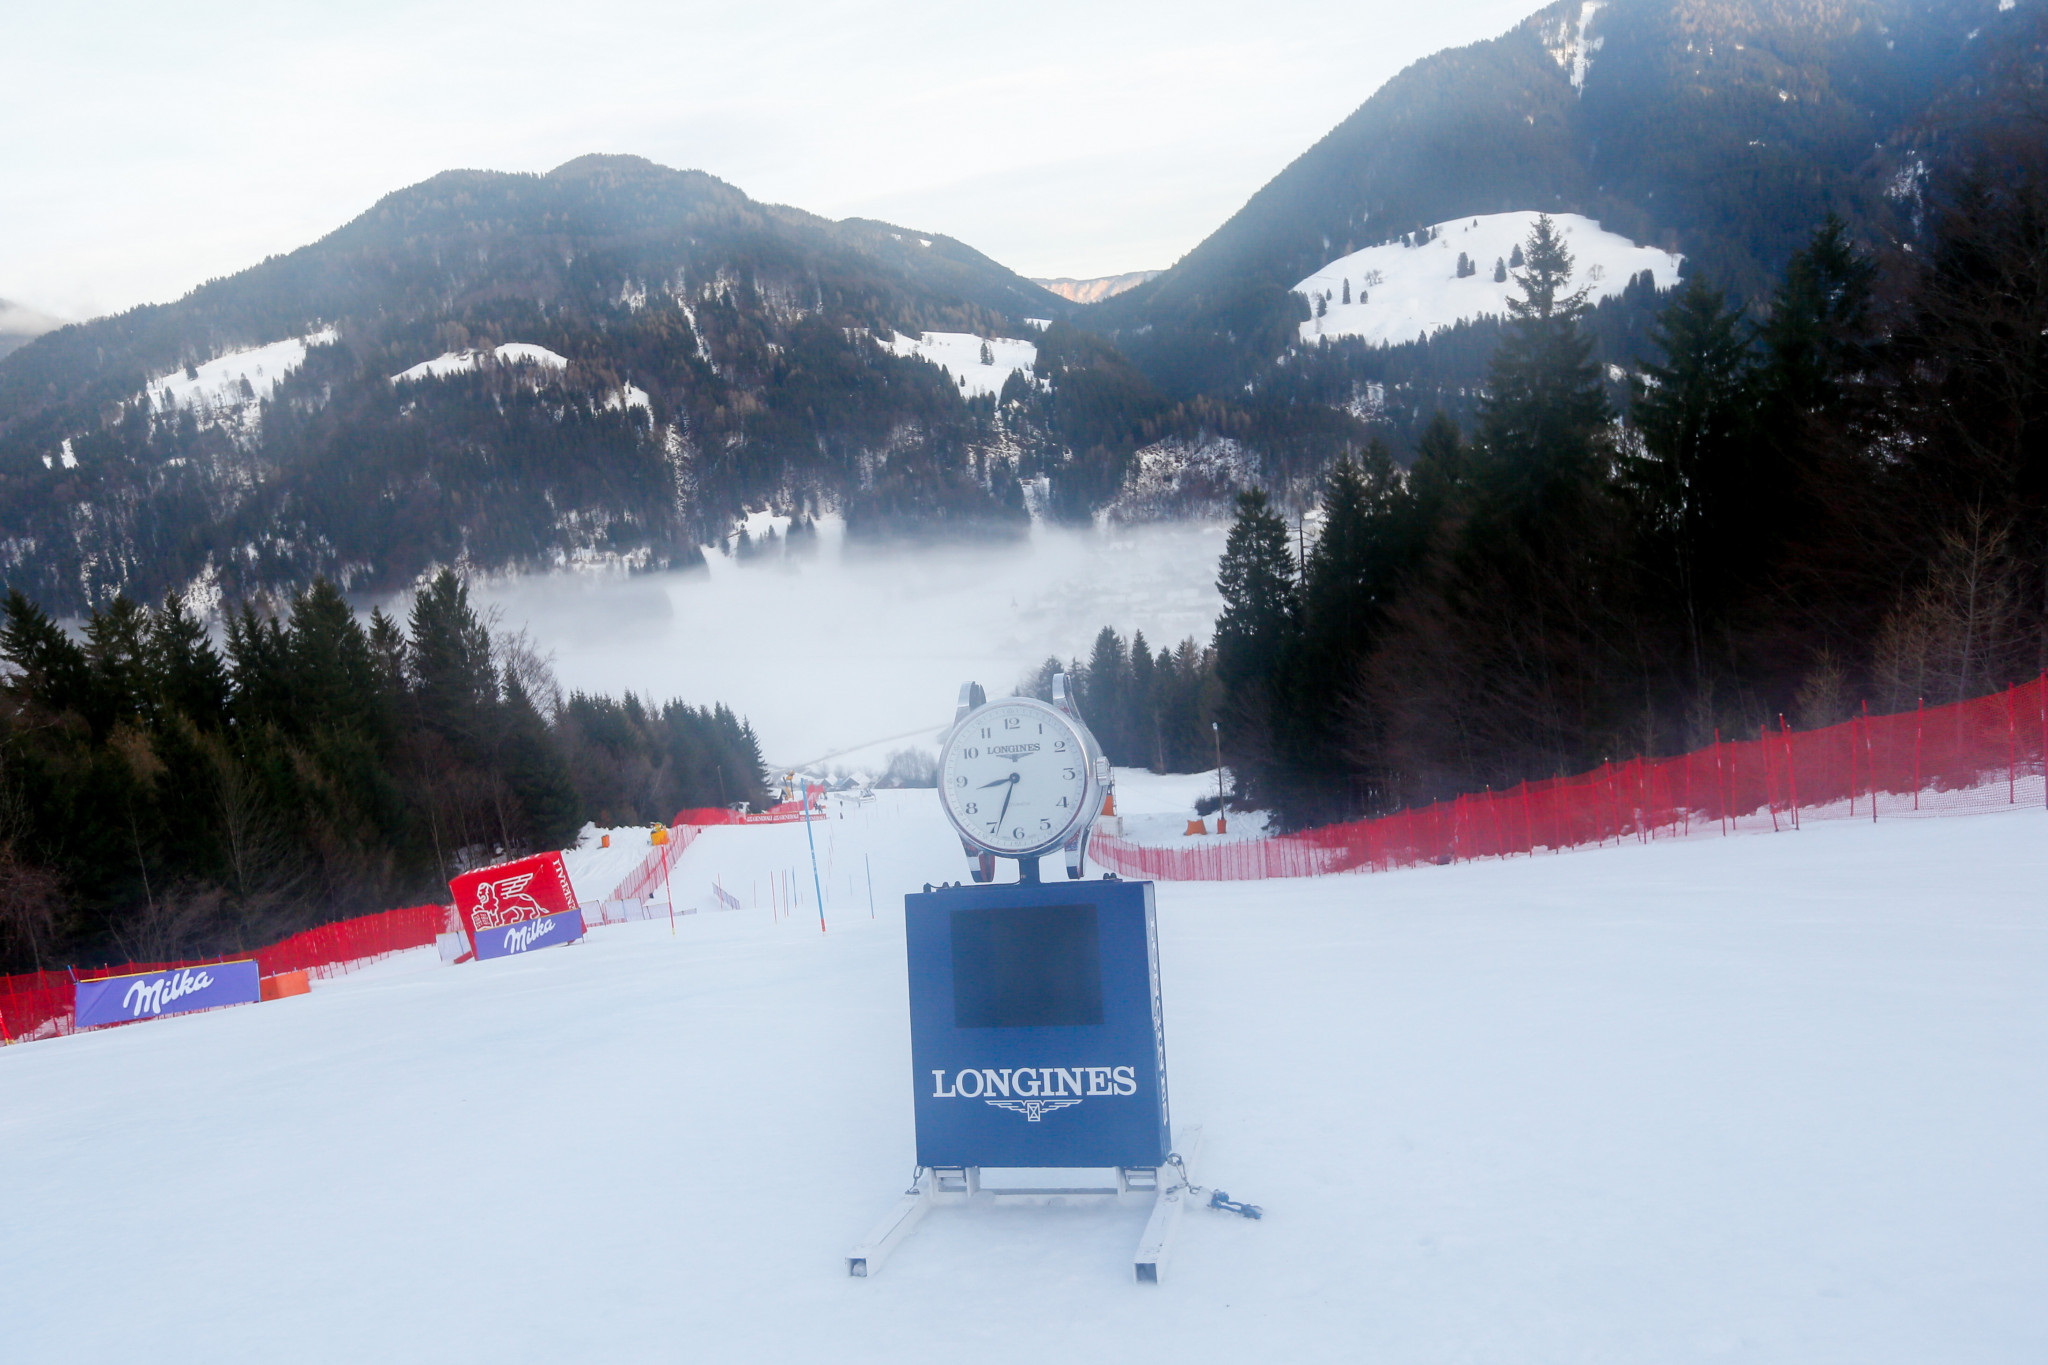 The Golden Fox event at the FIS Alpine Ski World Cup was moved from Maribor to Kranjska Gora due to poor weather conditions ©Getty Images